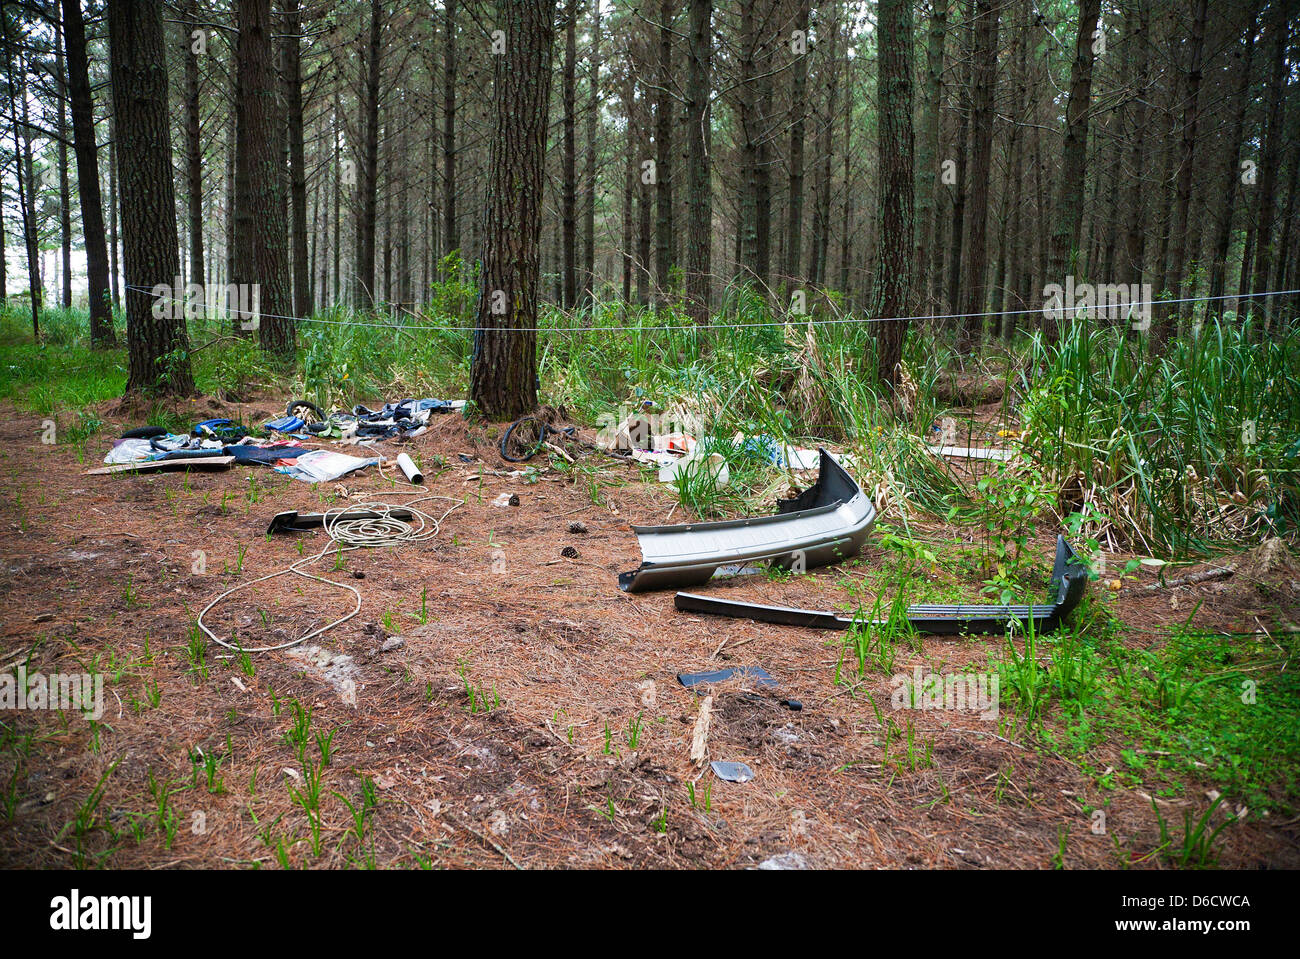 A view of fly tipping and household rubbish dumped in a forest area of North Island, New Zealand. Stock Photo